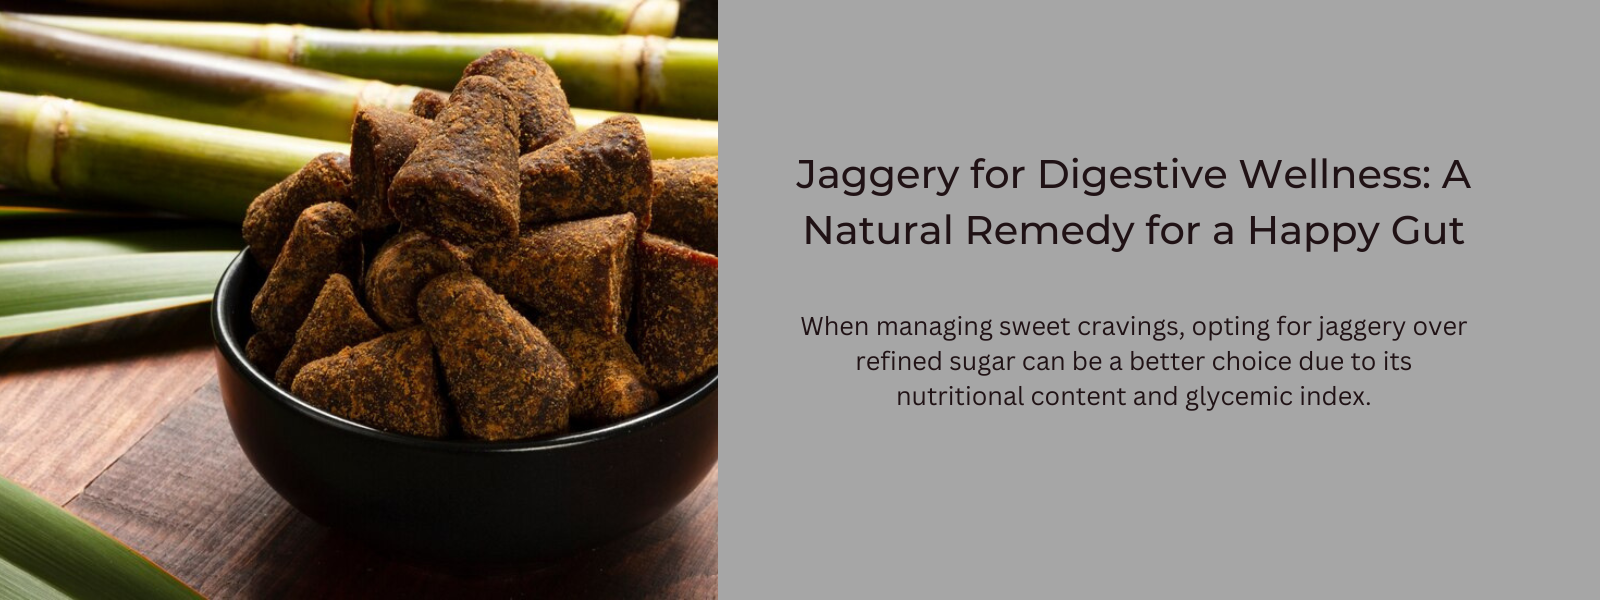 Jaggery for Digestive Wellness: A Natural Remedy for a Happy Gut